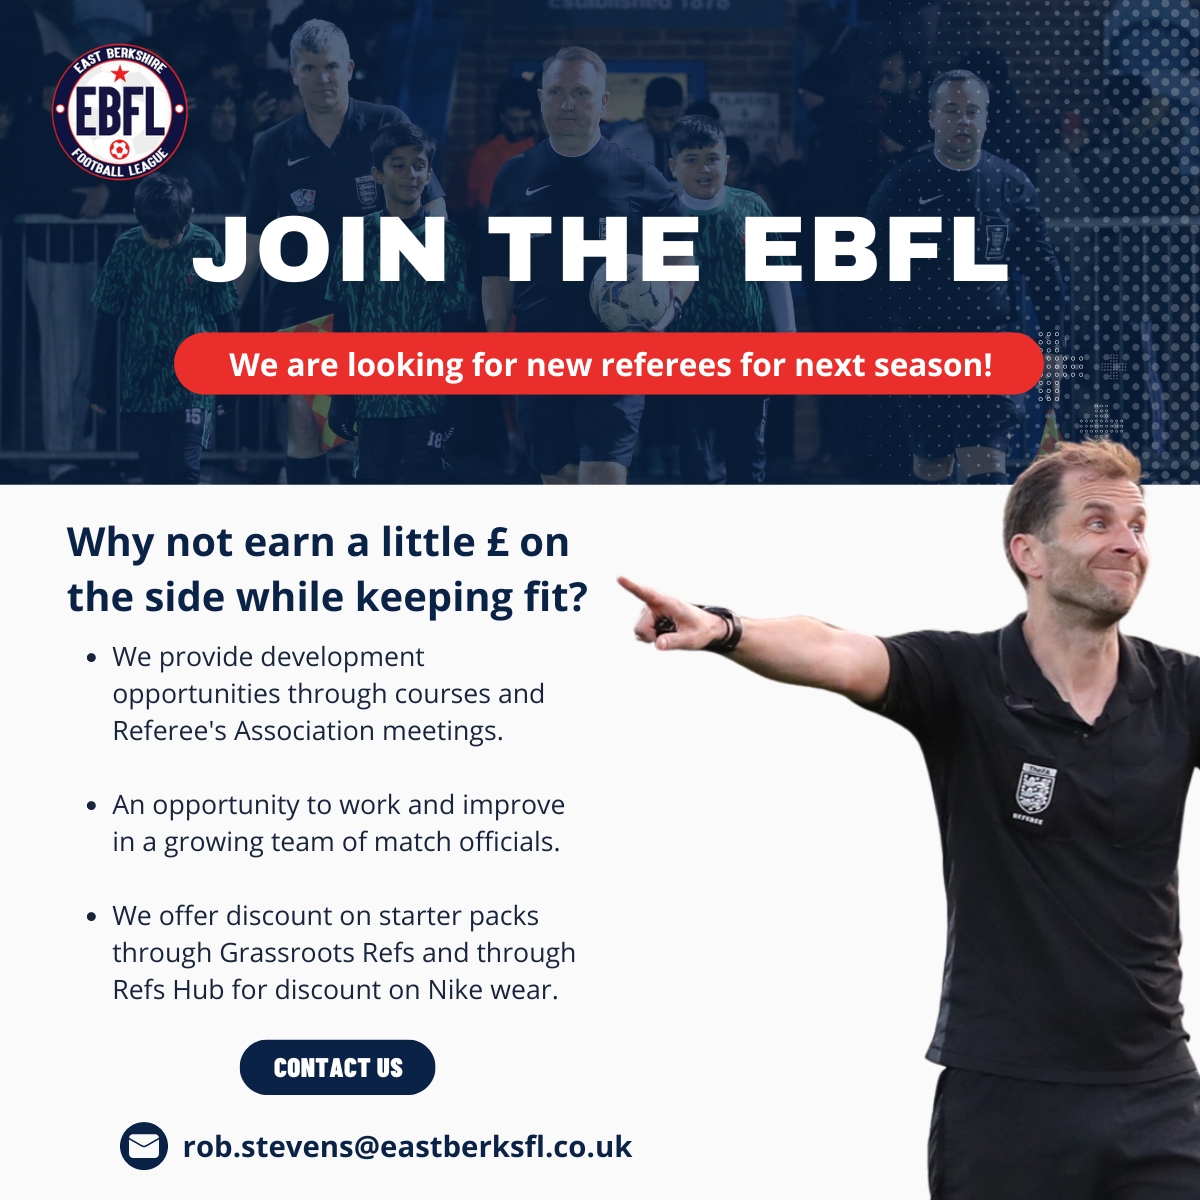 Have you considered becoming a referee before?

Looking to earn a little extra £ while keeping fit?

Get in touch today! 👇🏻
rob.stevens@eastberksfl.co.uk

#EBFL